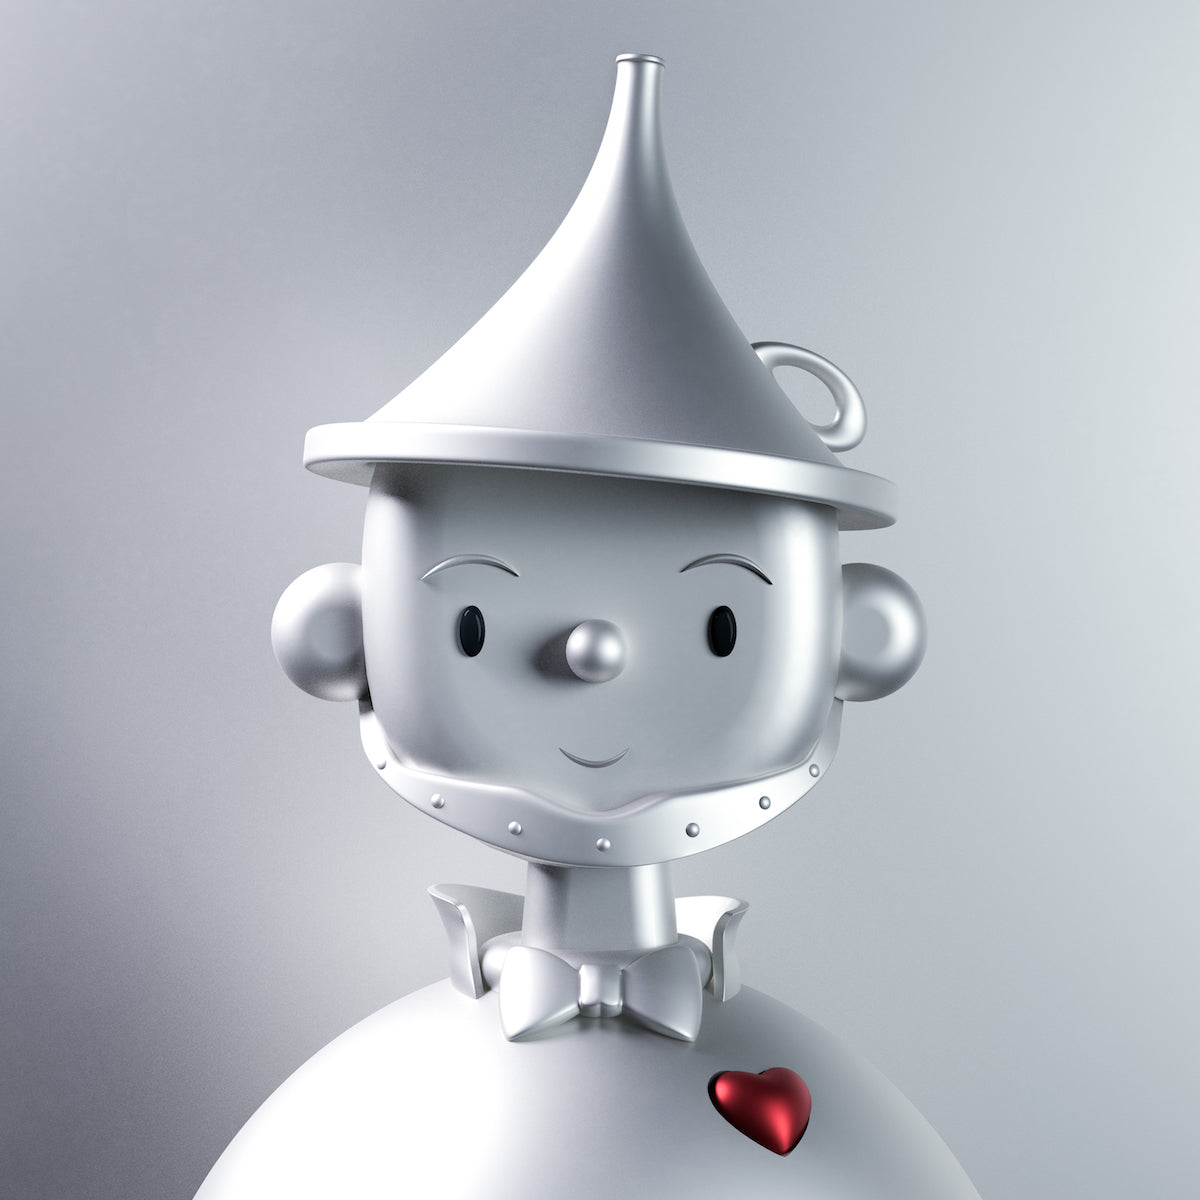 Tinman Toy Face by Amrit Pal Singh